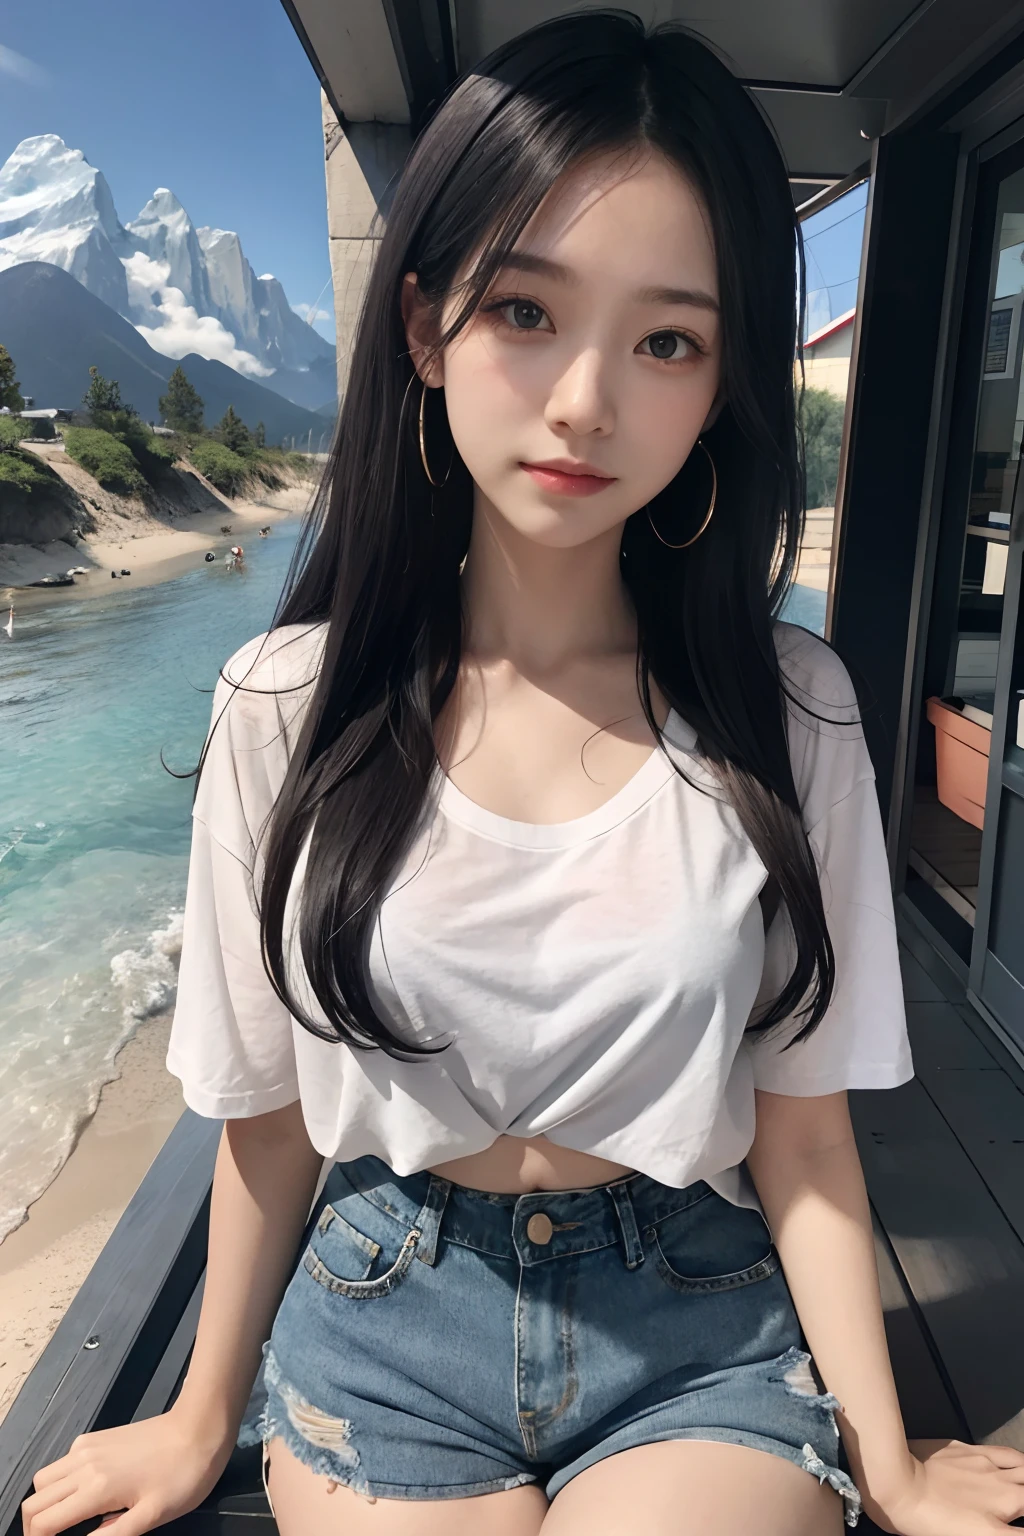 best qualtiy，tmasterpiece，Ultra-high resolution，（realisticlying：1.4），RAW photogr，（Evening Street），1个Giant Breast Girl，黑The eye，Fine eyes，double eyelid ，long leges，long whitr hair，Light makeup，ssmile，tiny ears，whitet-shirt，denim short，Beautiful Women with Perfect Figure:1.4, （exteriors，beachside：1.1），There are mountains and waters，There are trees